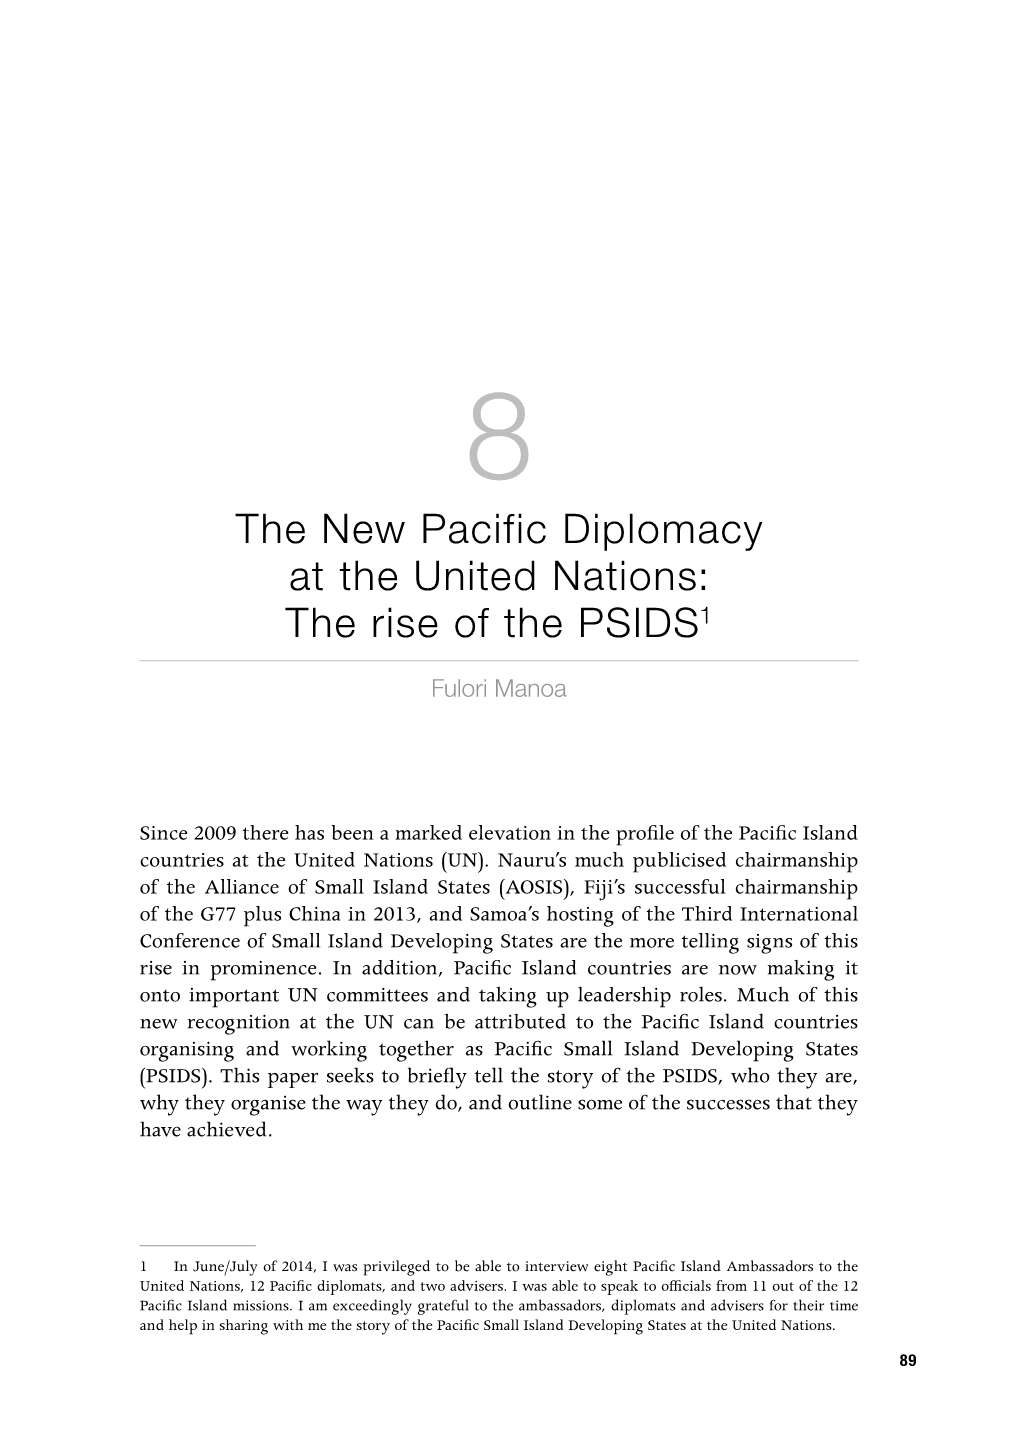 Pacific Small Island Developing States (PSIDS)